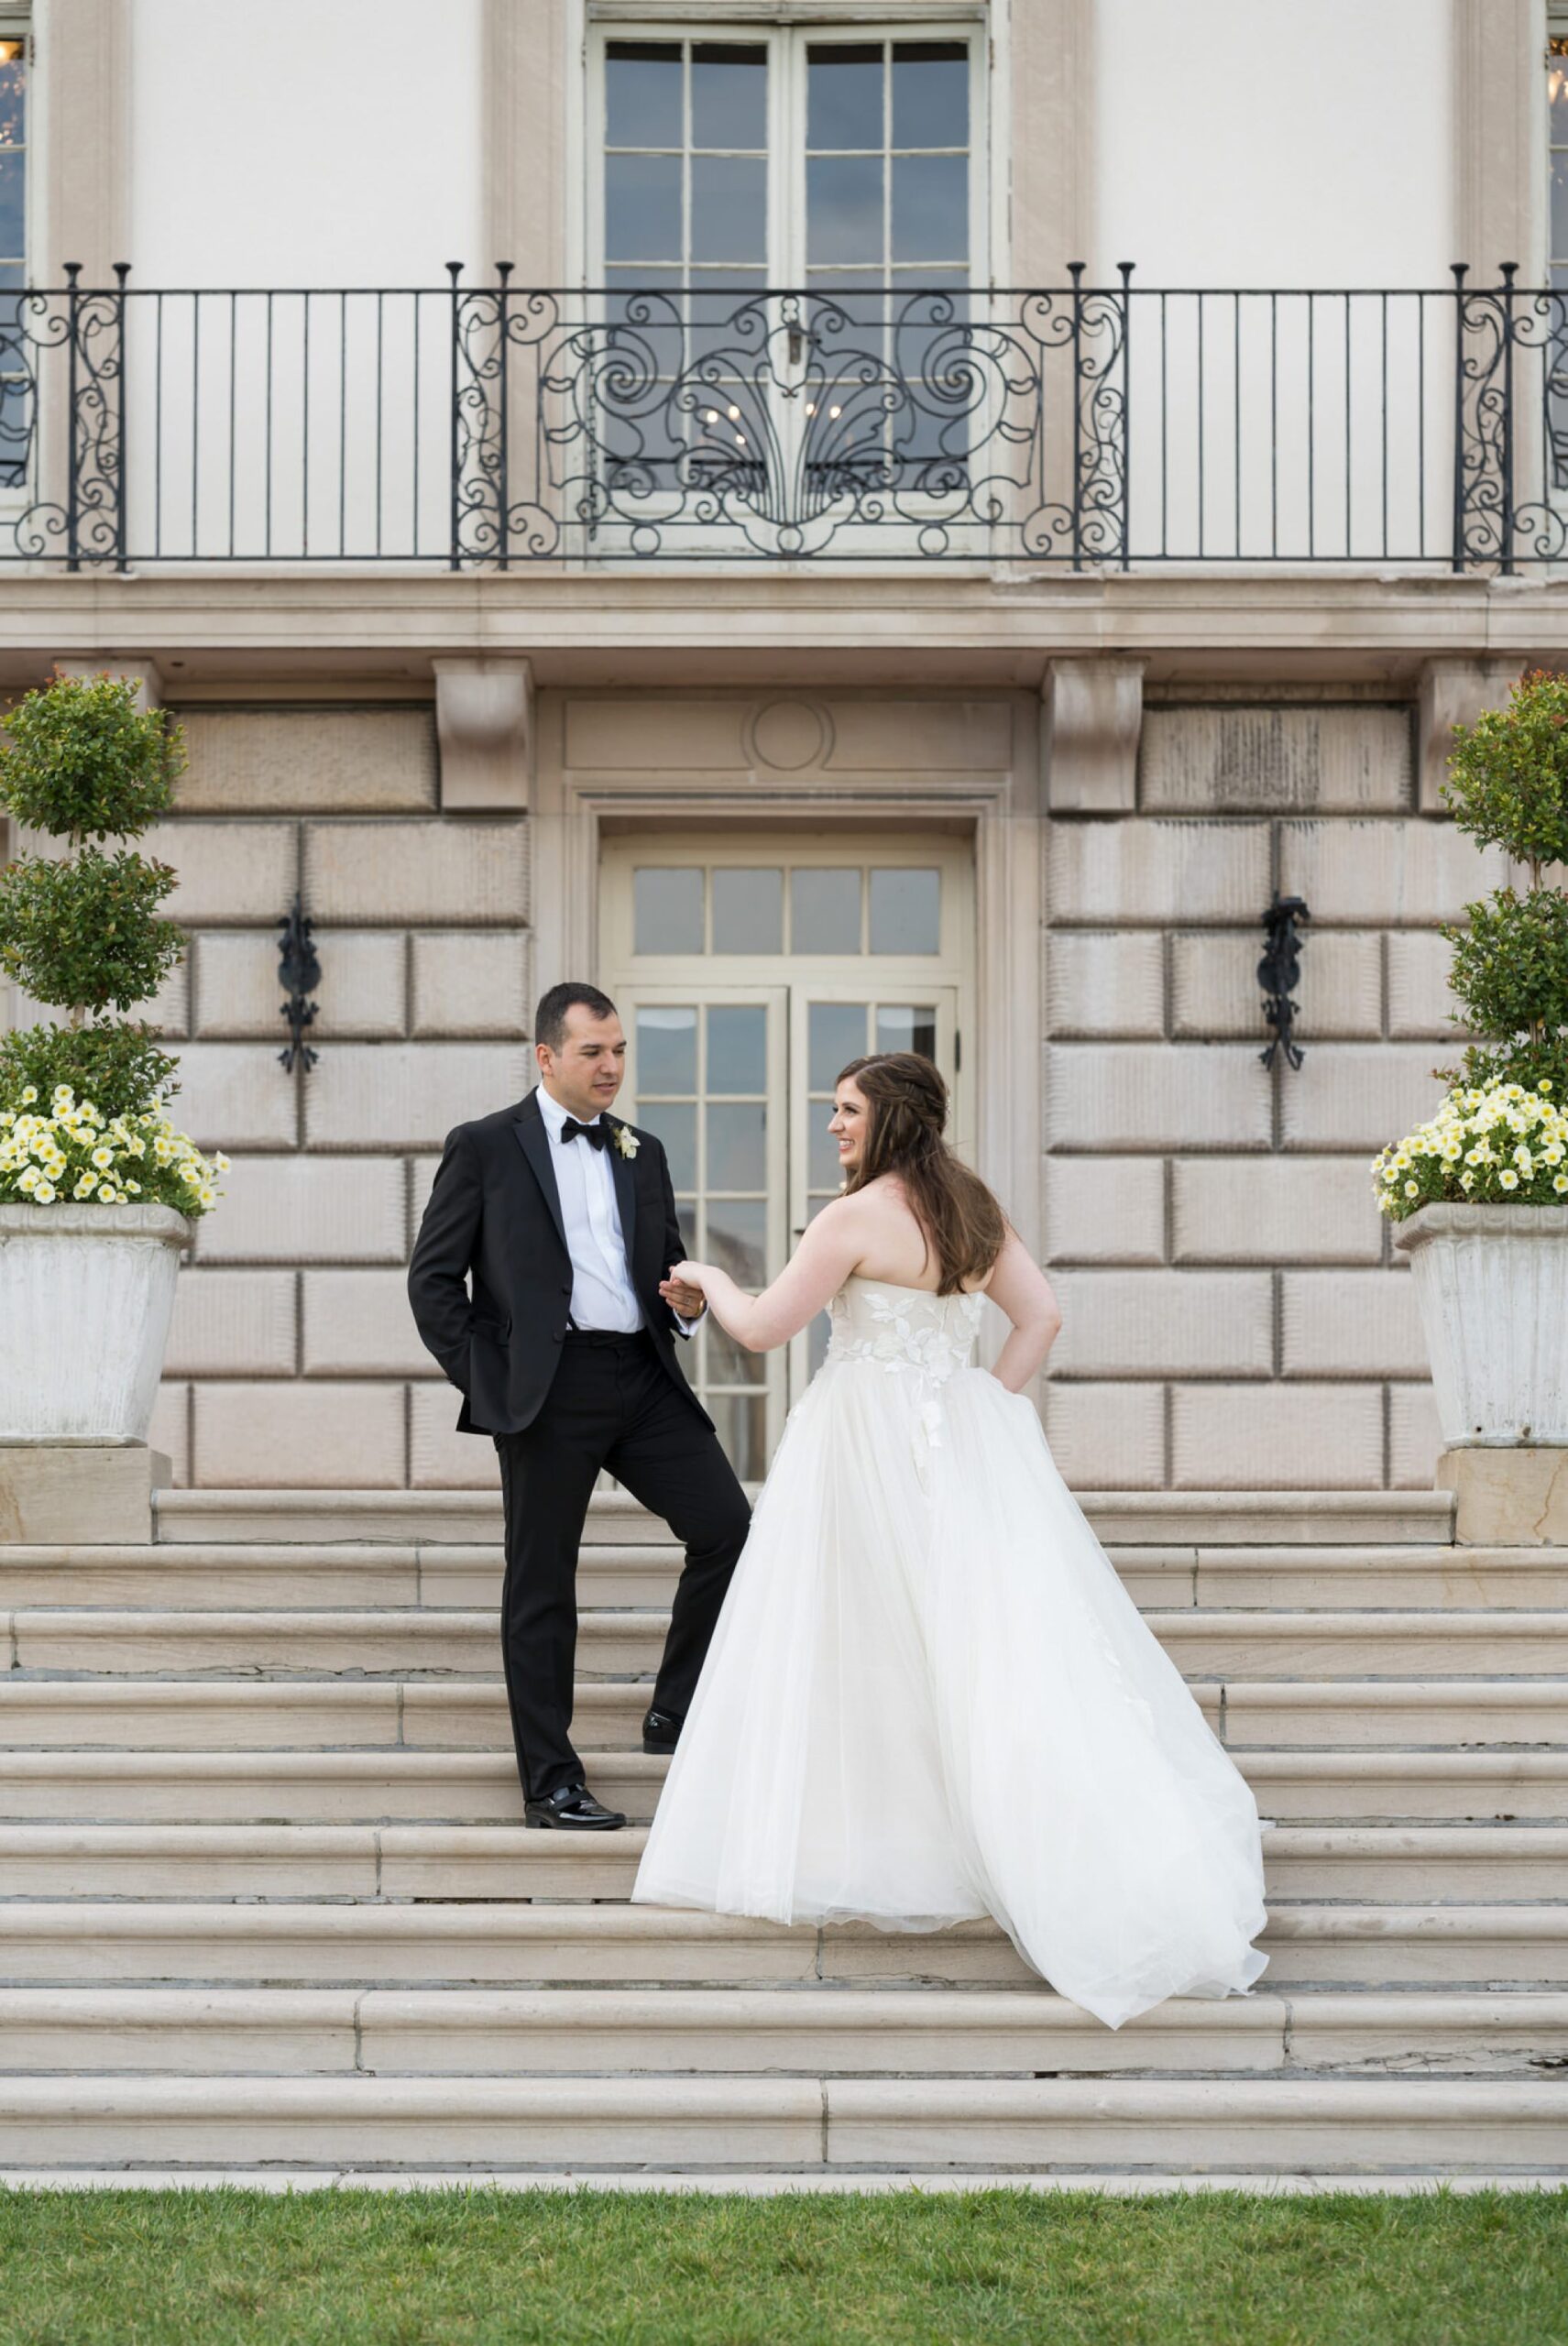 A bride and groom walk up steps during their wedding at the War Memorial.  